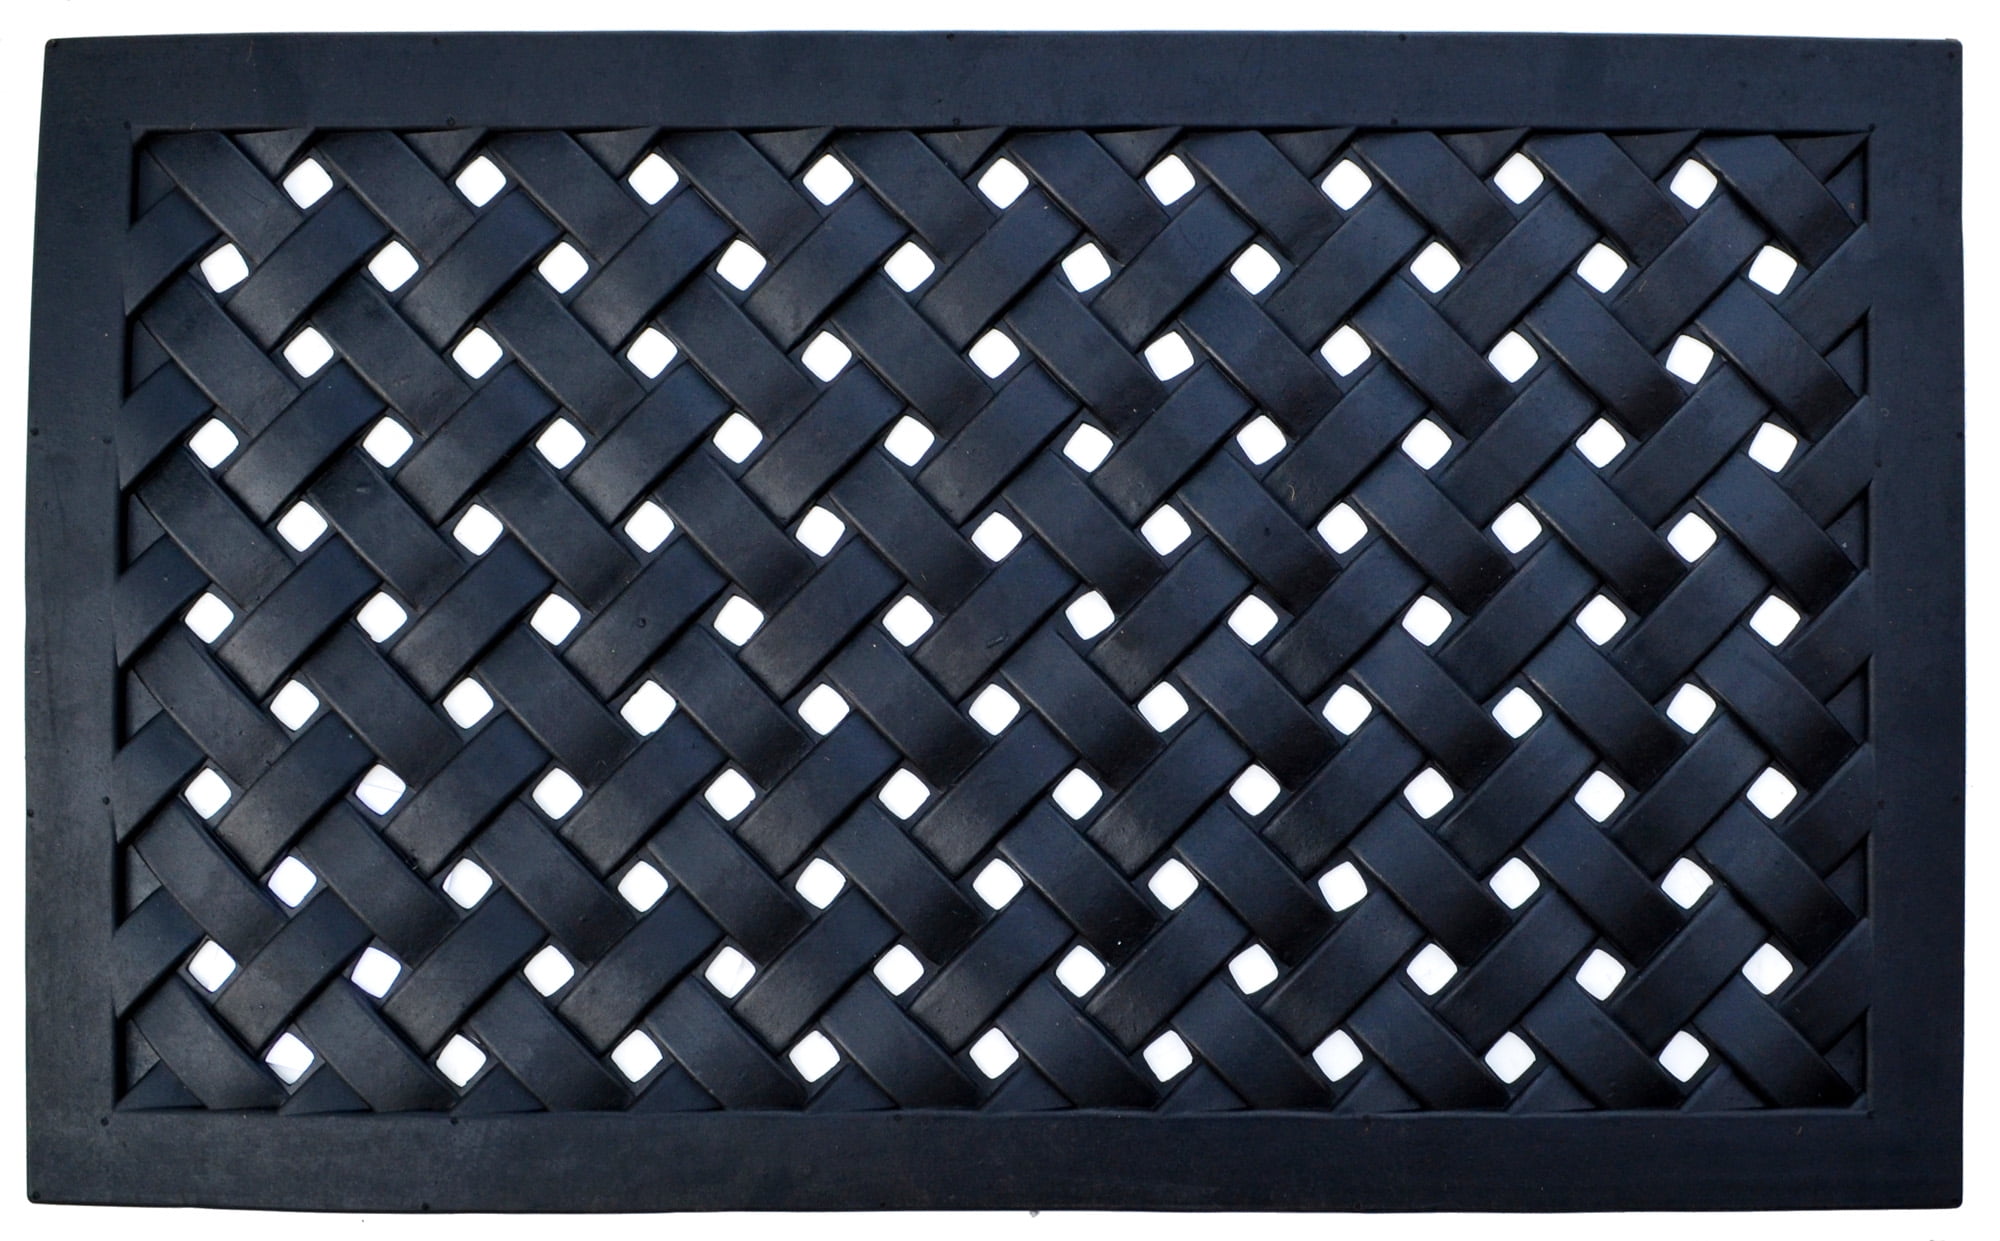 30" Black Braided Patterned Rubber Rubber Mat -